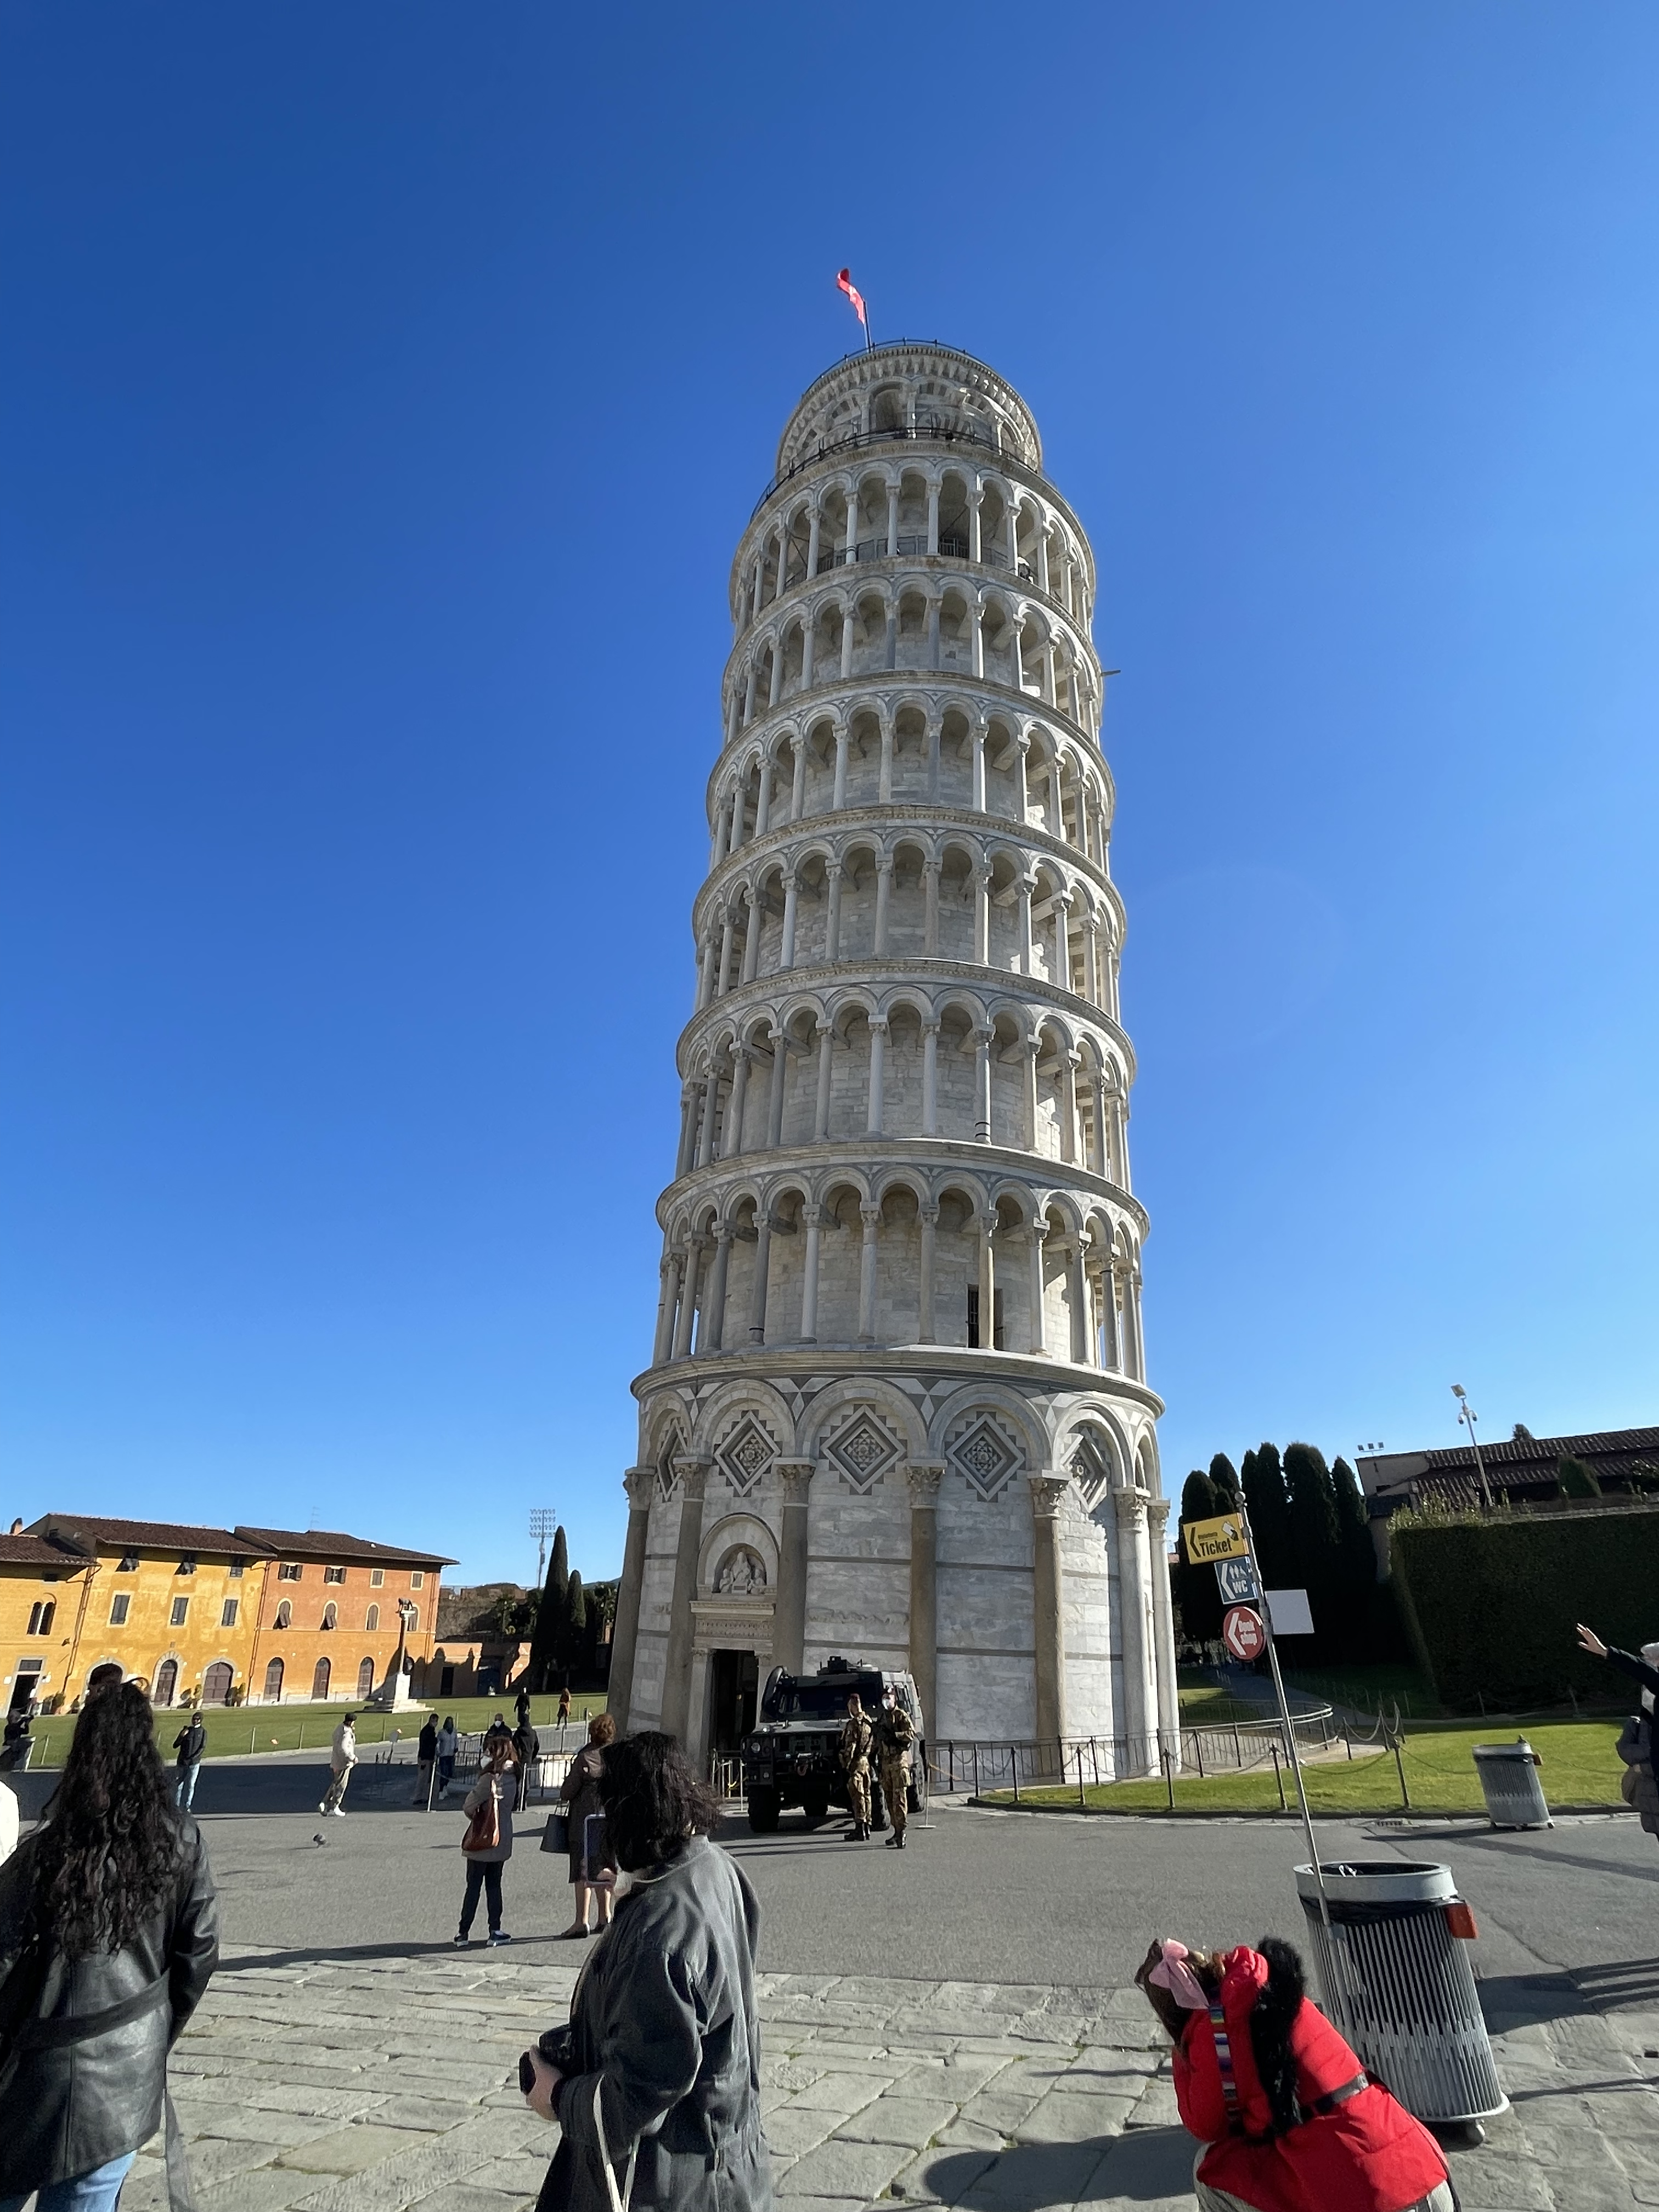 "ISI Florence trip to Pisa" by Shayna Martin